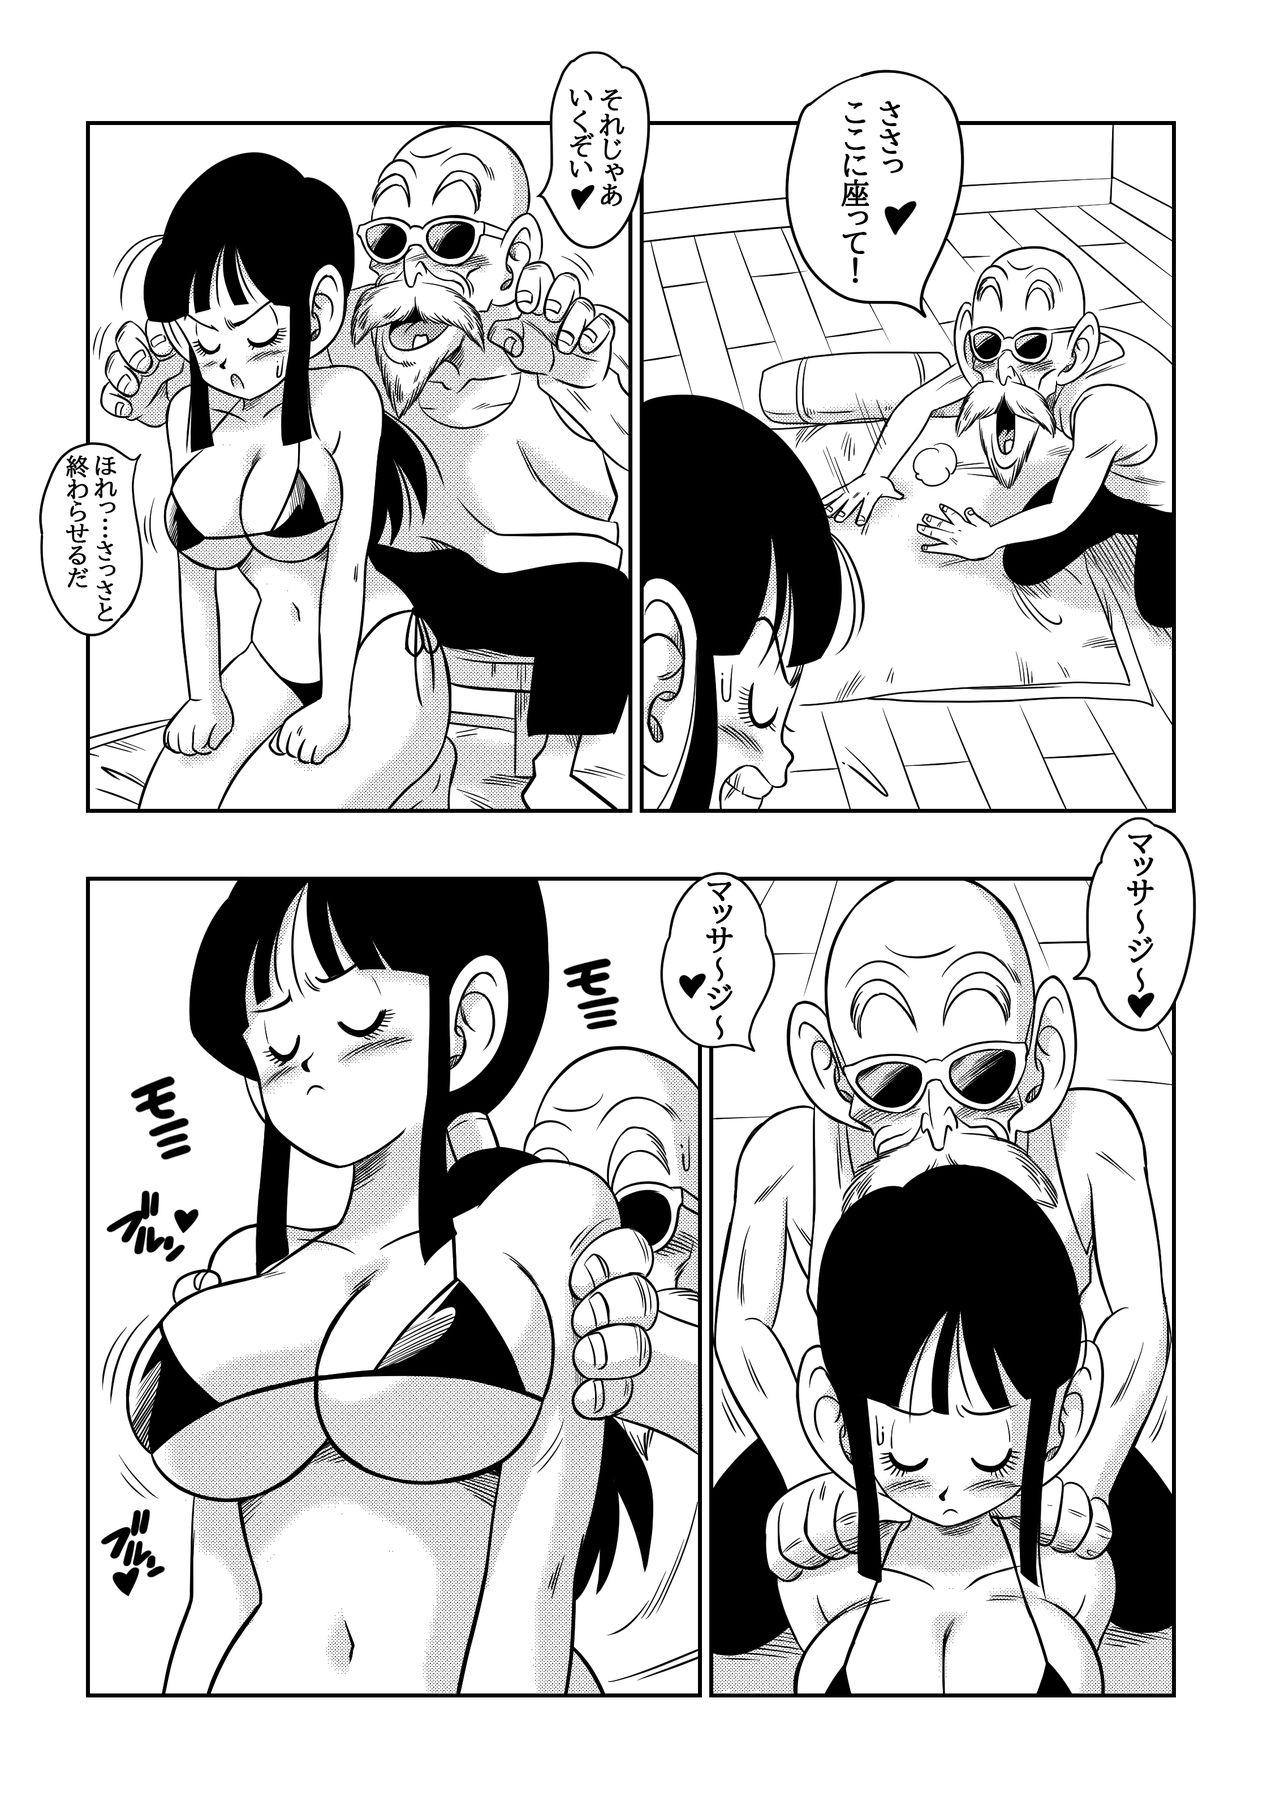 Massive "An Ancient Tradition" - Young Wife is Harassed! - Dragon ball z Adult Toys - Page 8